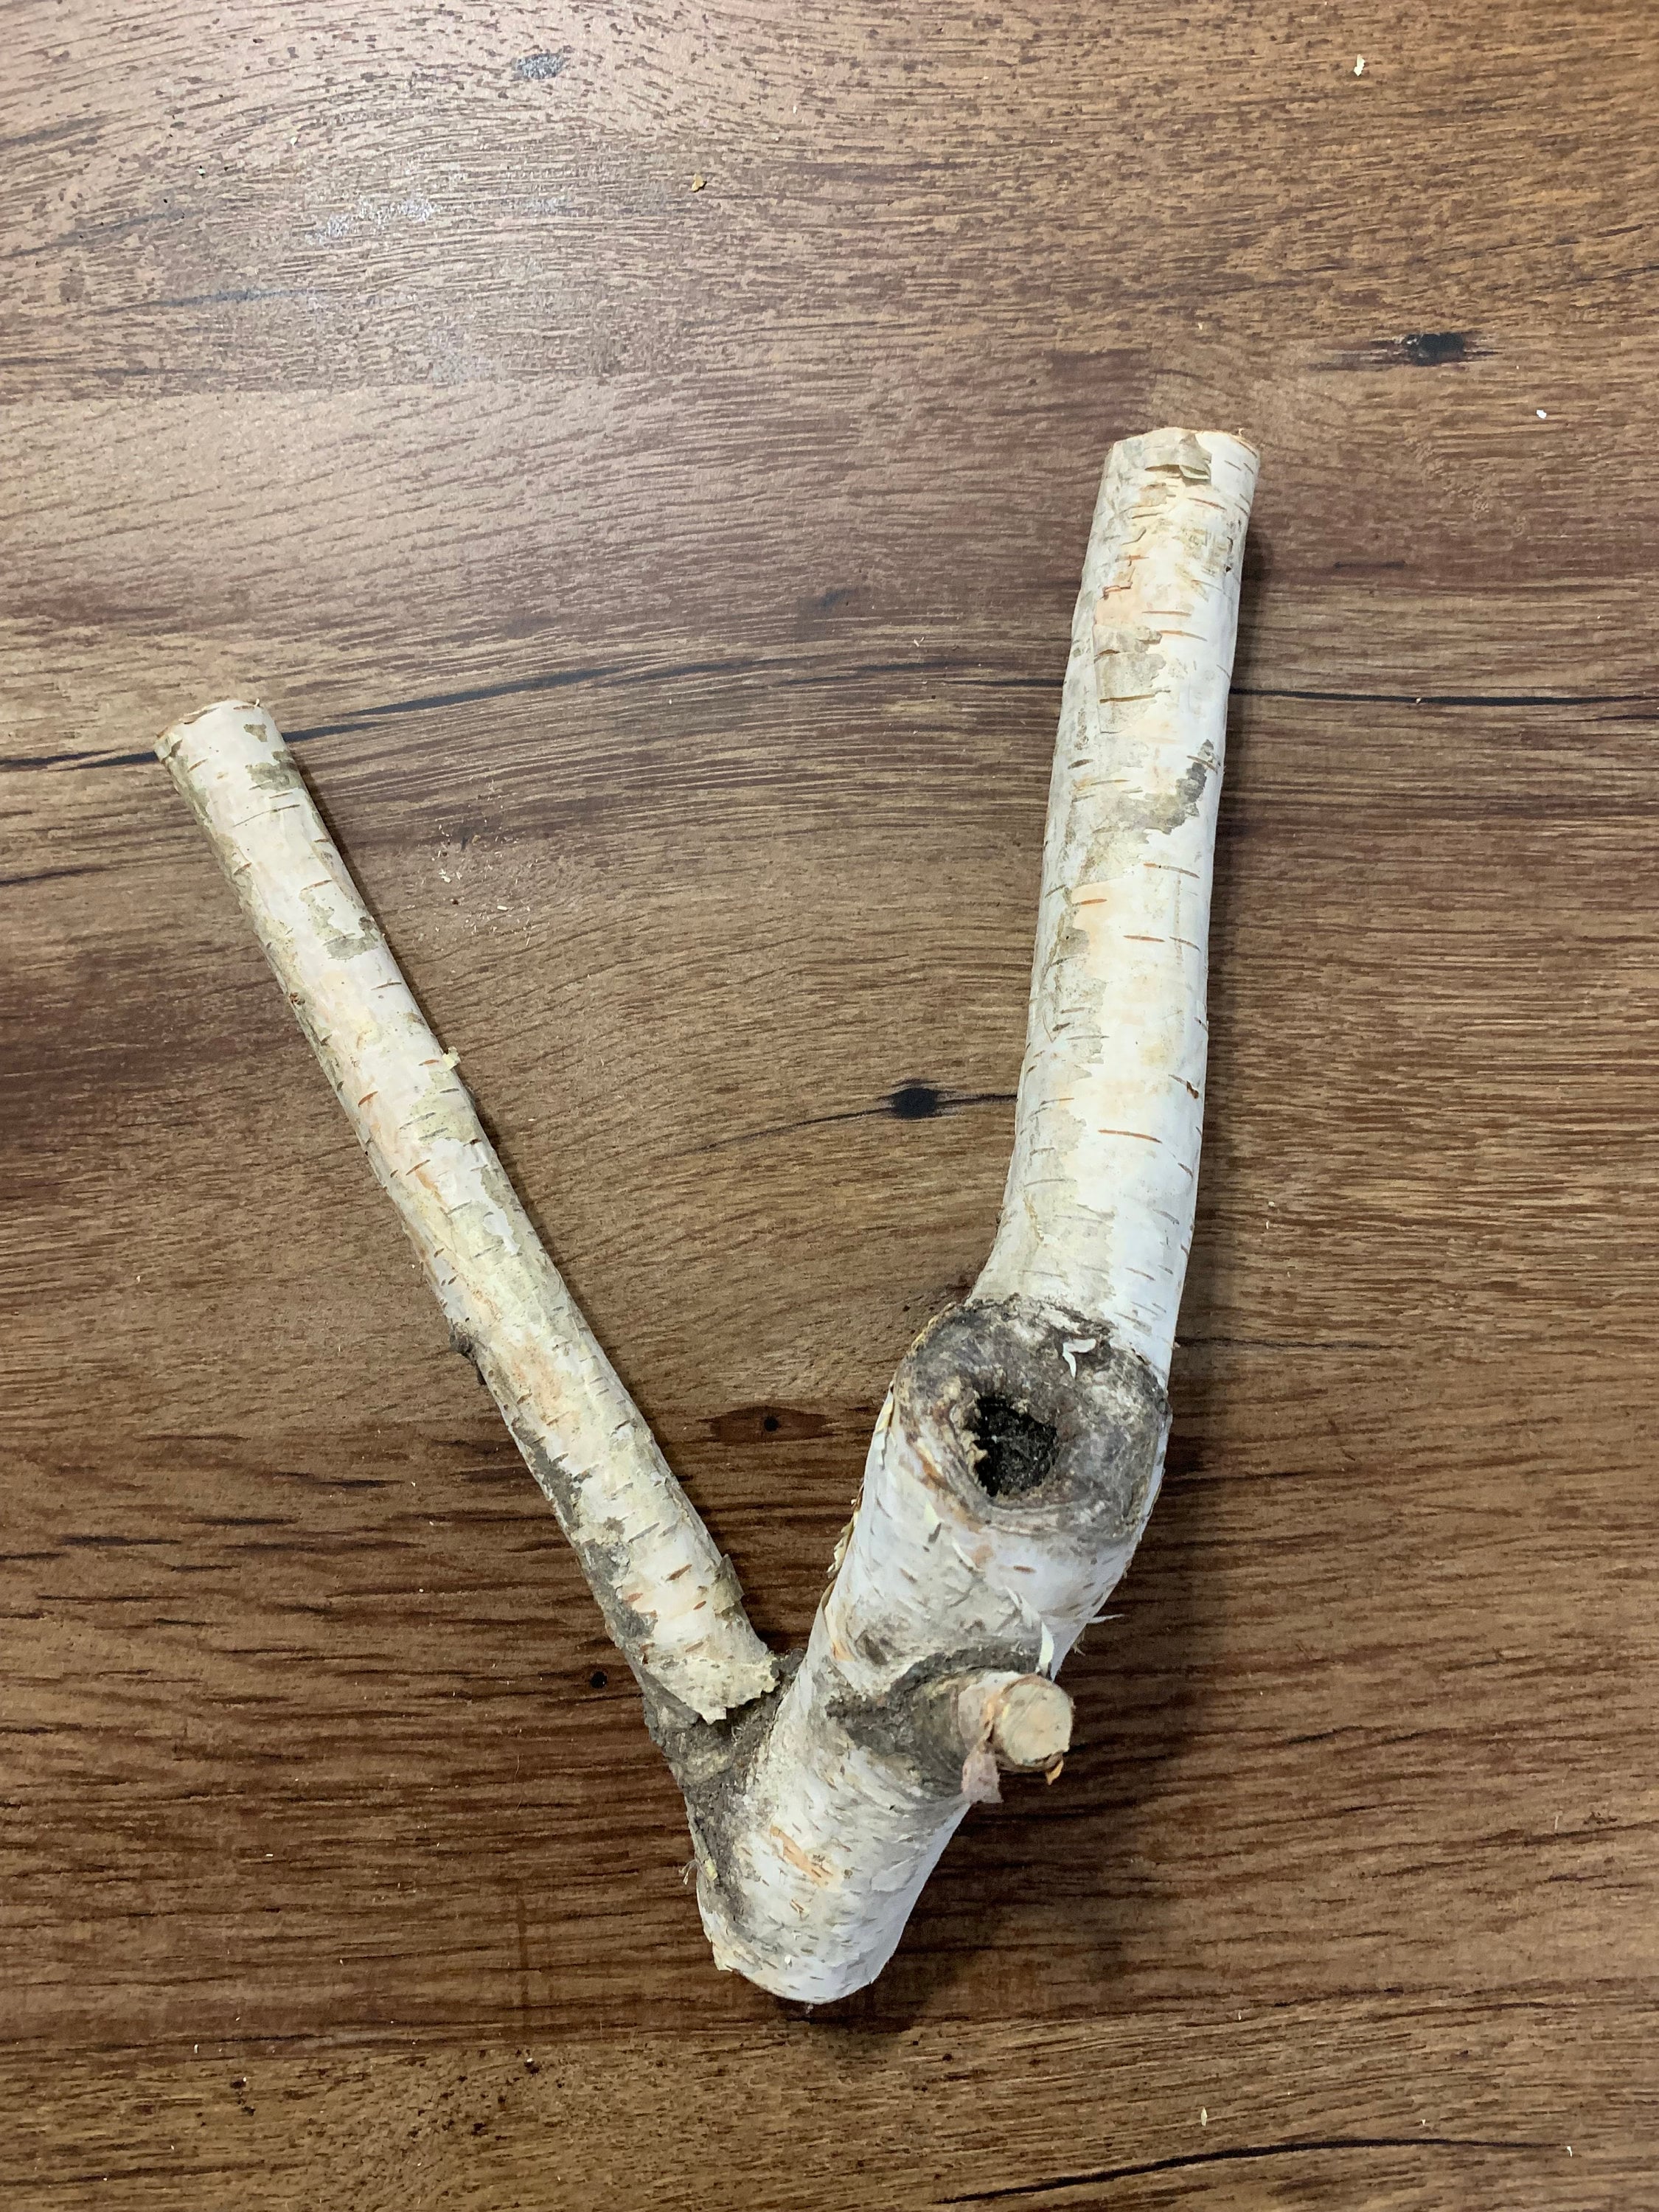 Unique White Birch Y Branch, Approximately 10 inches long x 7 inches wide